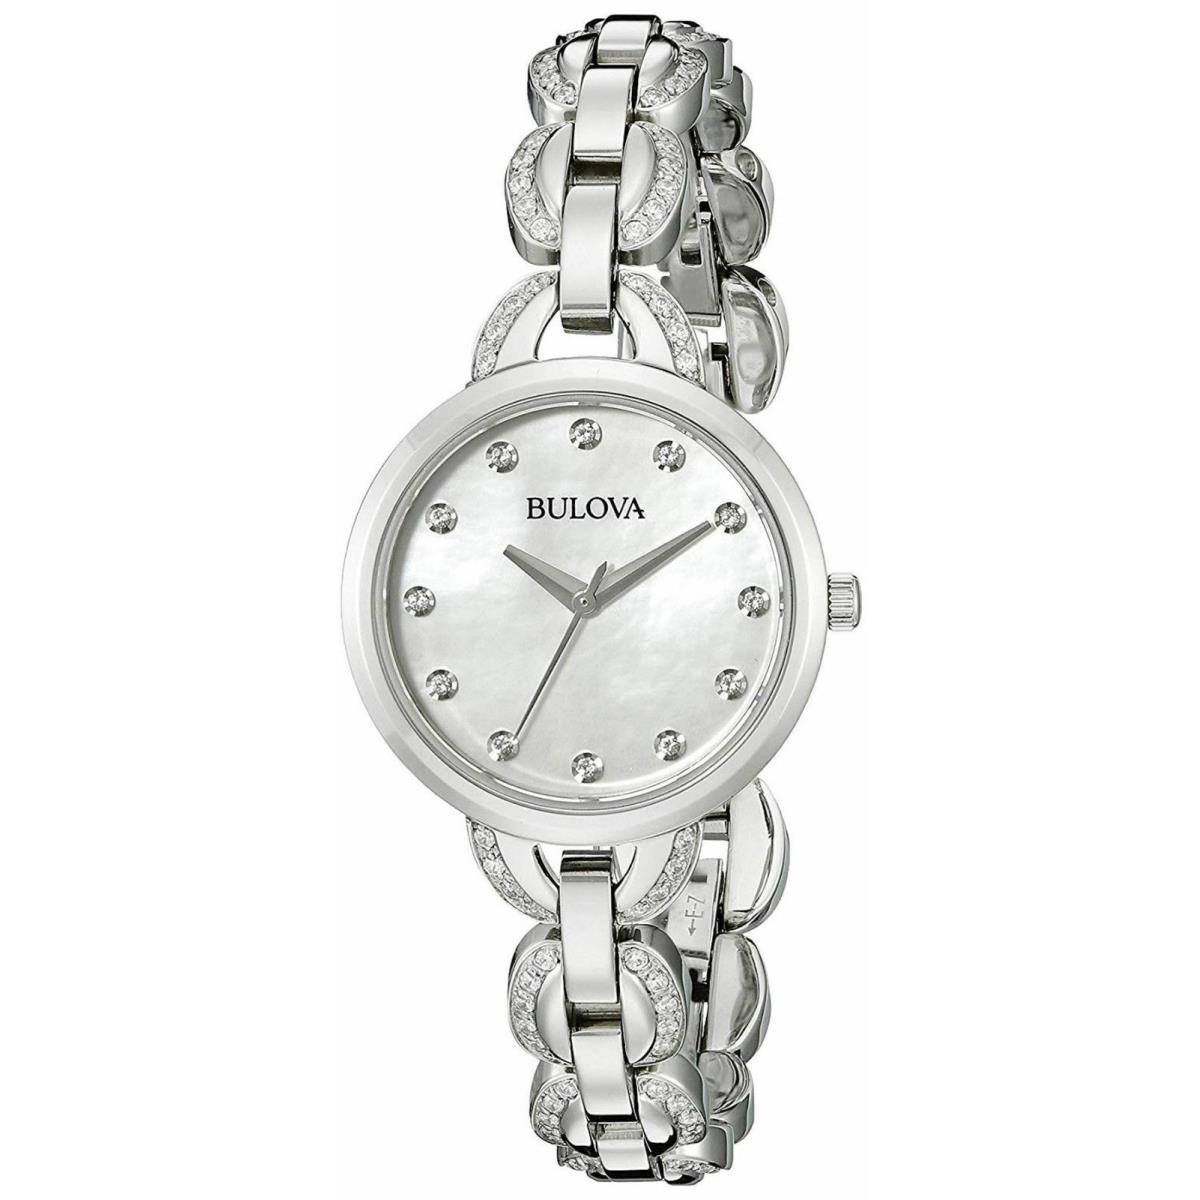 Bulova 96L203 Women`s Mother of Pearl Dial Silver-tone Quartz 28mm Dress Watch - Mother of Pearl Dial, Silver Band